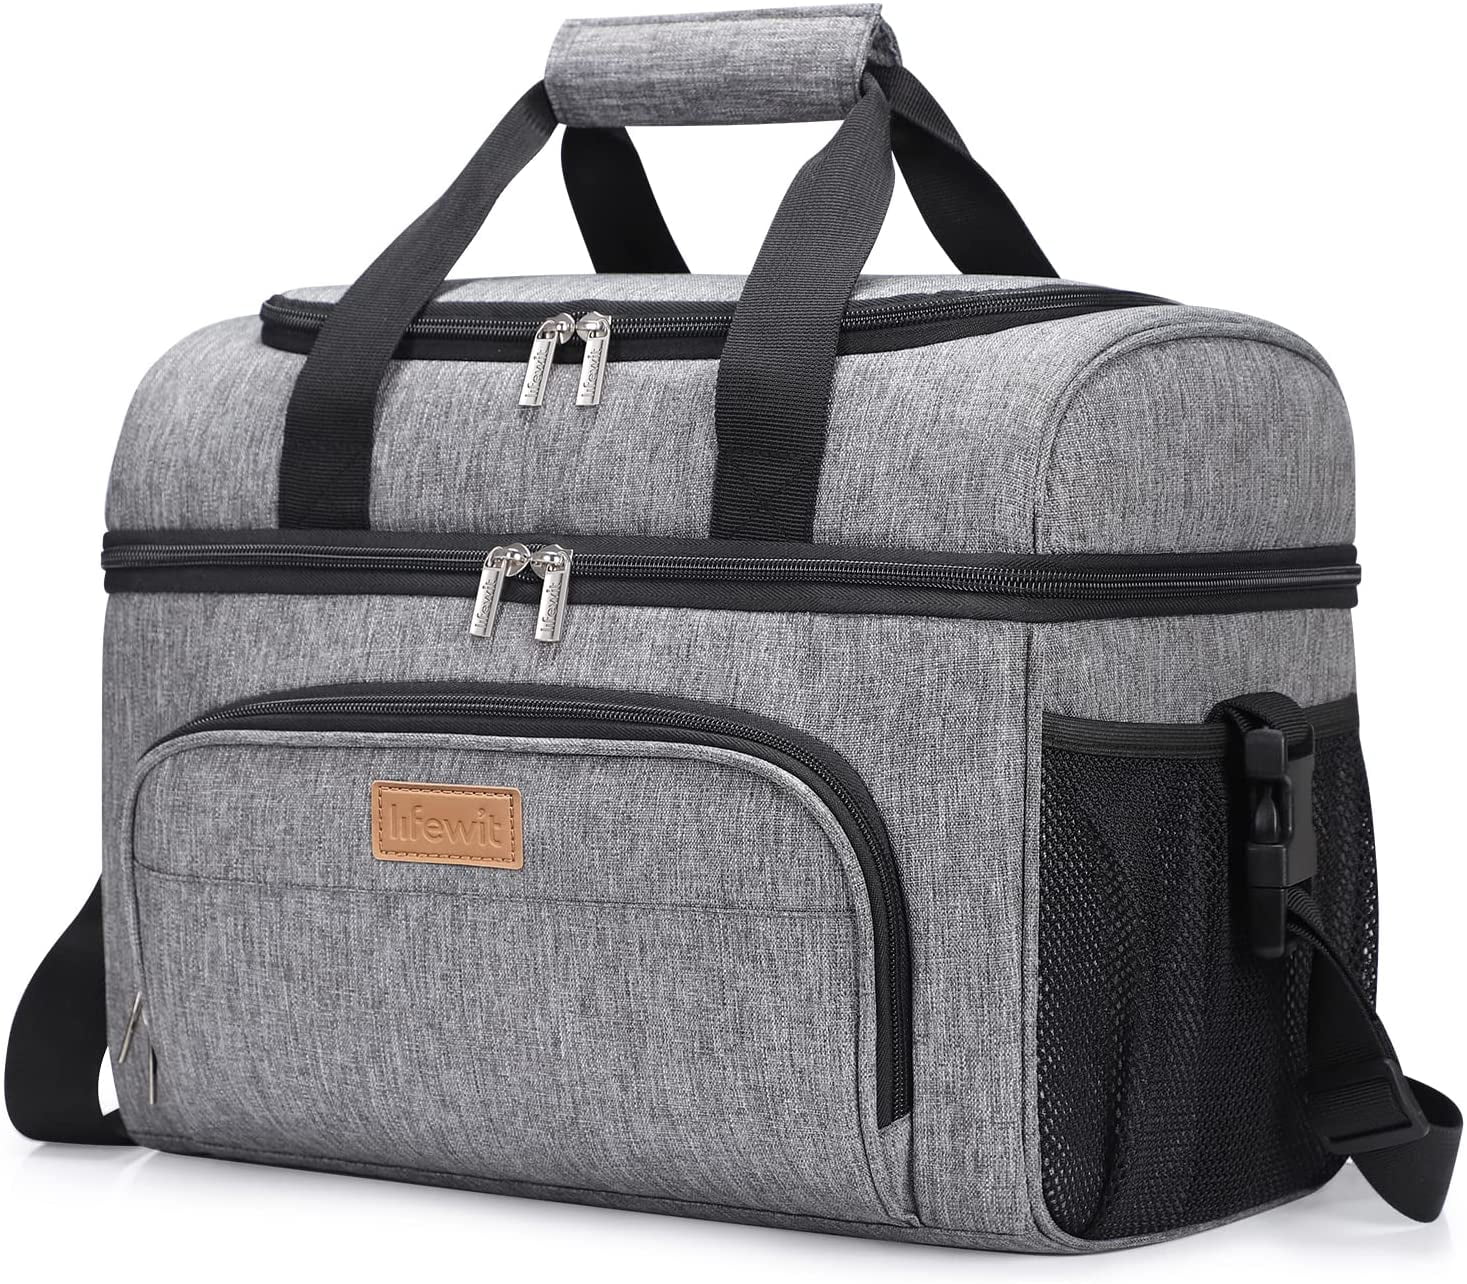 Lifewit 32 Can Soft Cooler Bag Lightweight Portable Cooler Tote Double Layer, Gray, Men's, Size: Large